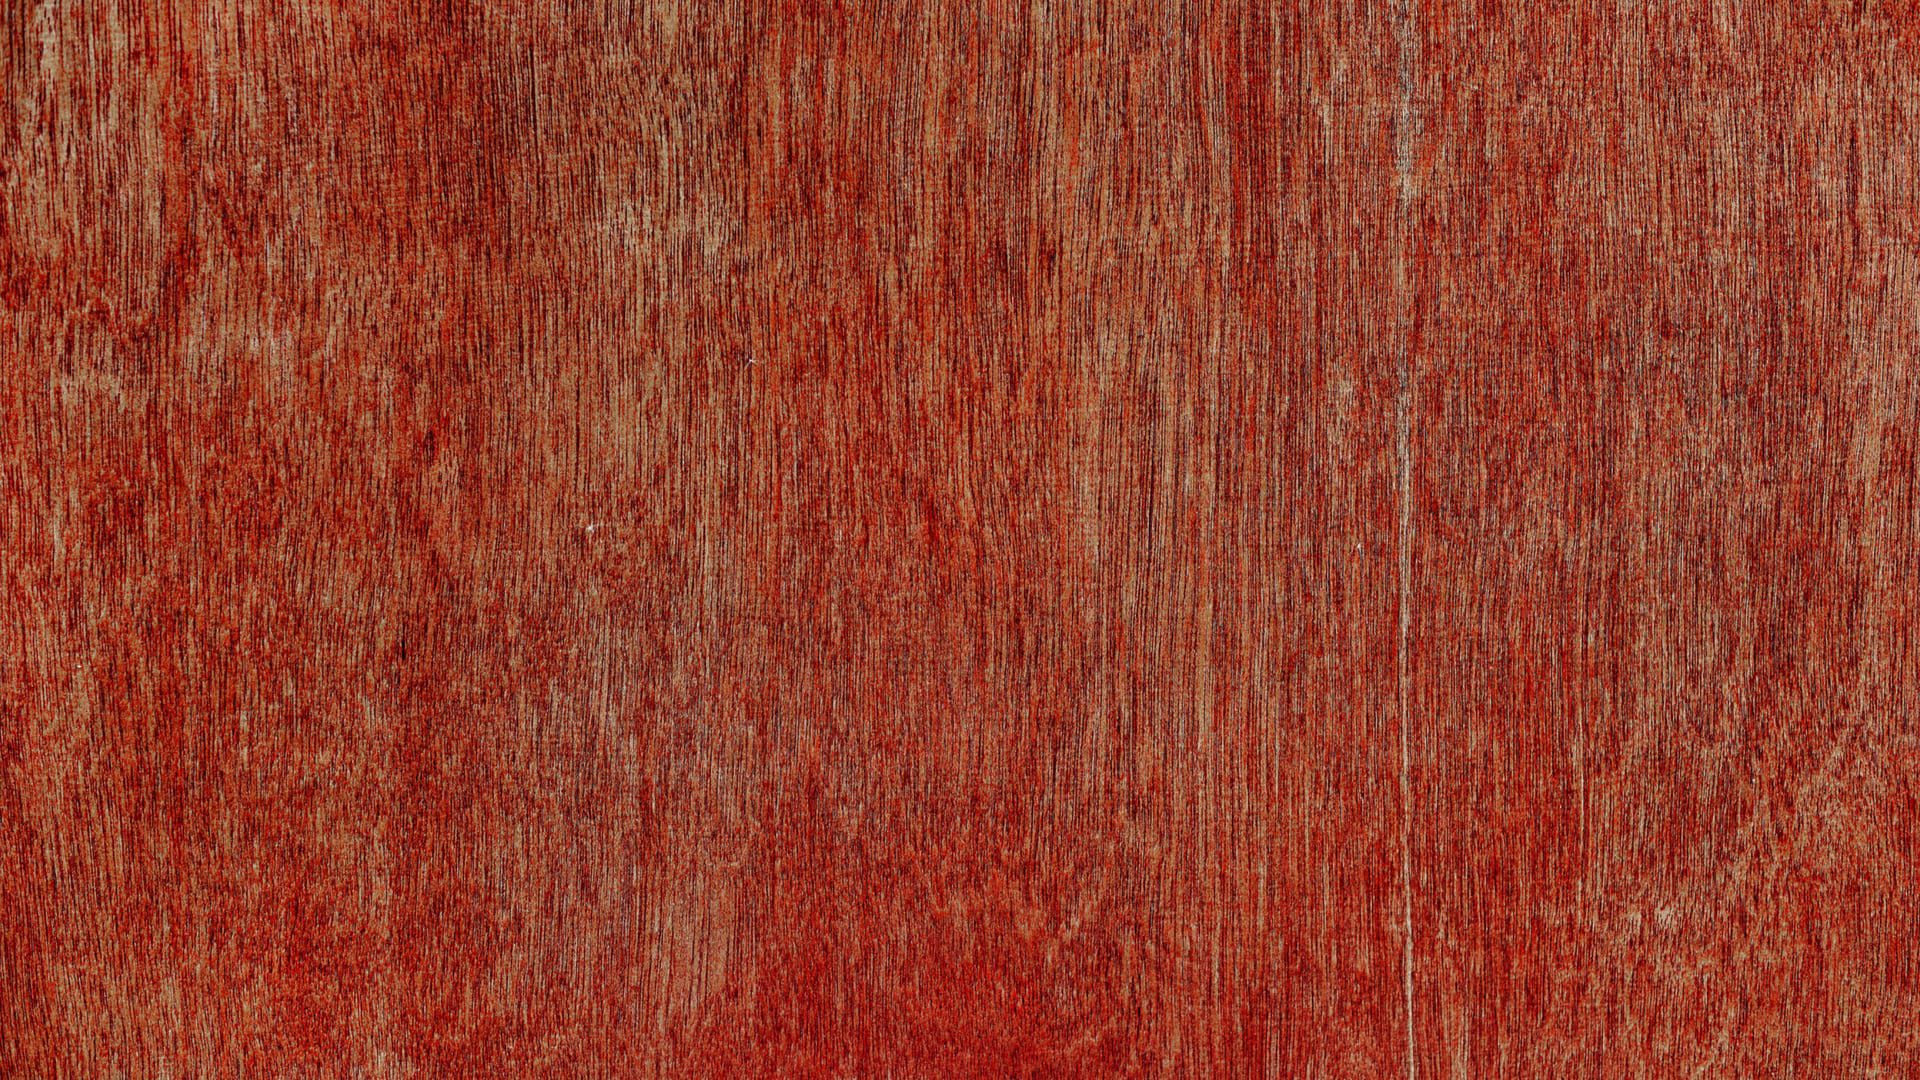 RUSTY RED BACKGROUND